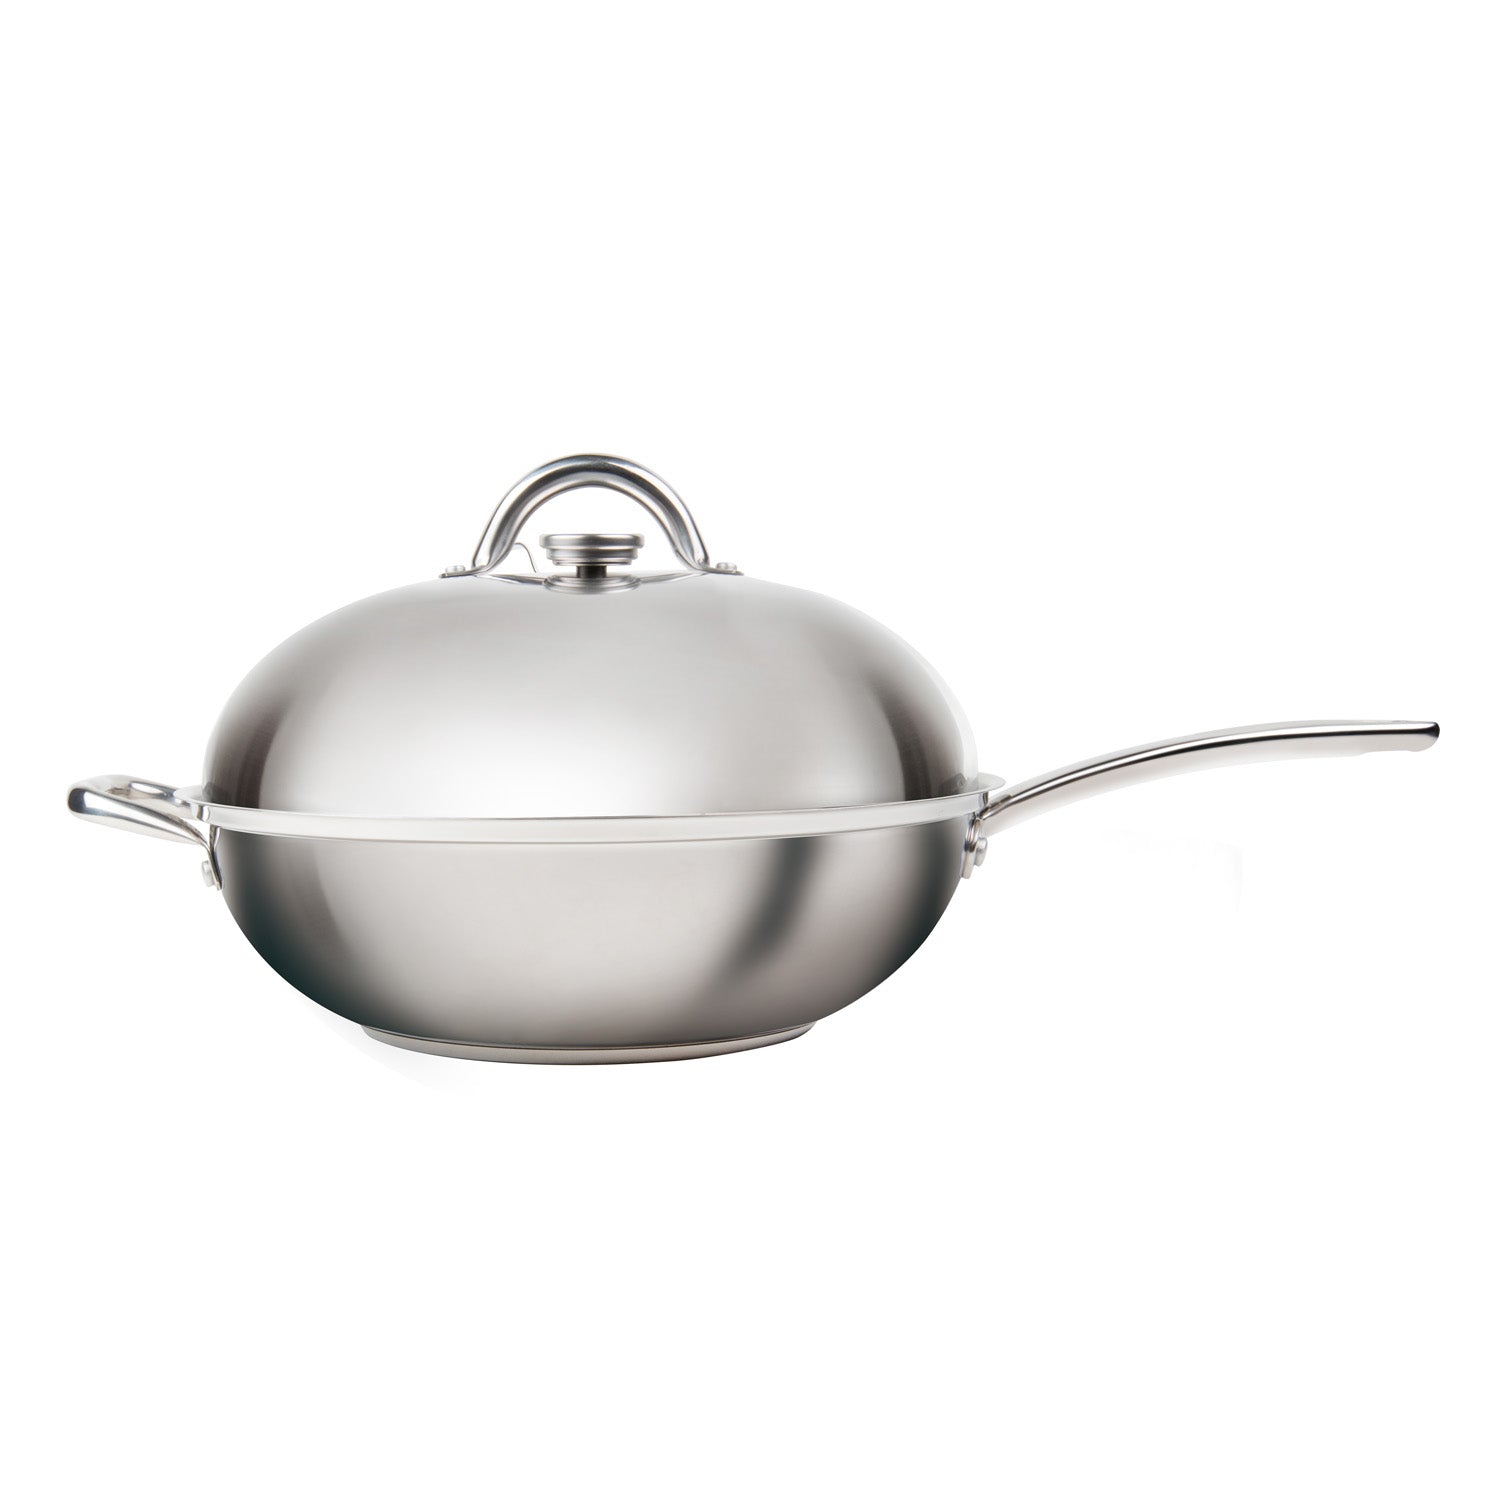 MASTERPAN 4-in-1 Multi-Use Smoker Wok With Stainless Steel Lid, 13